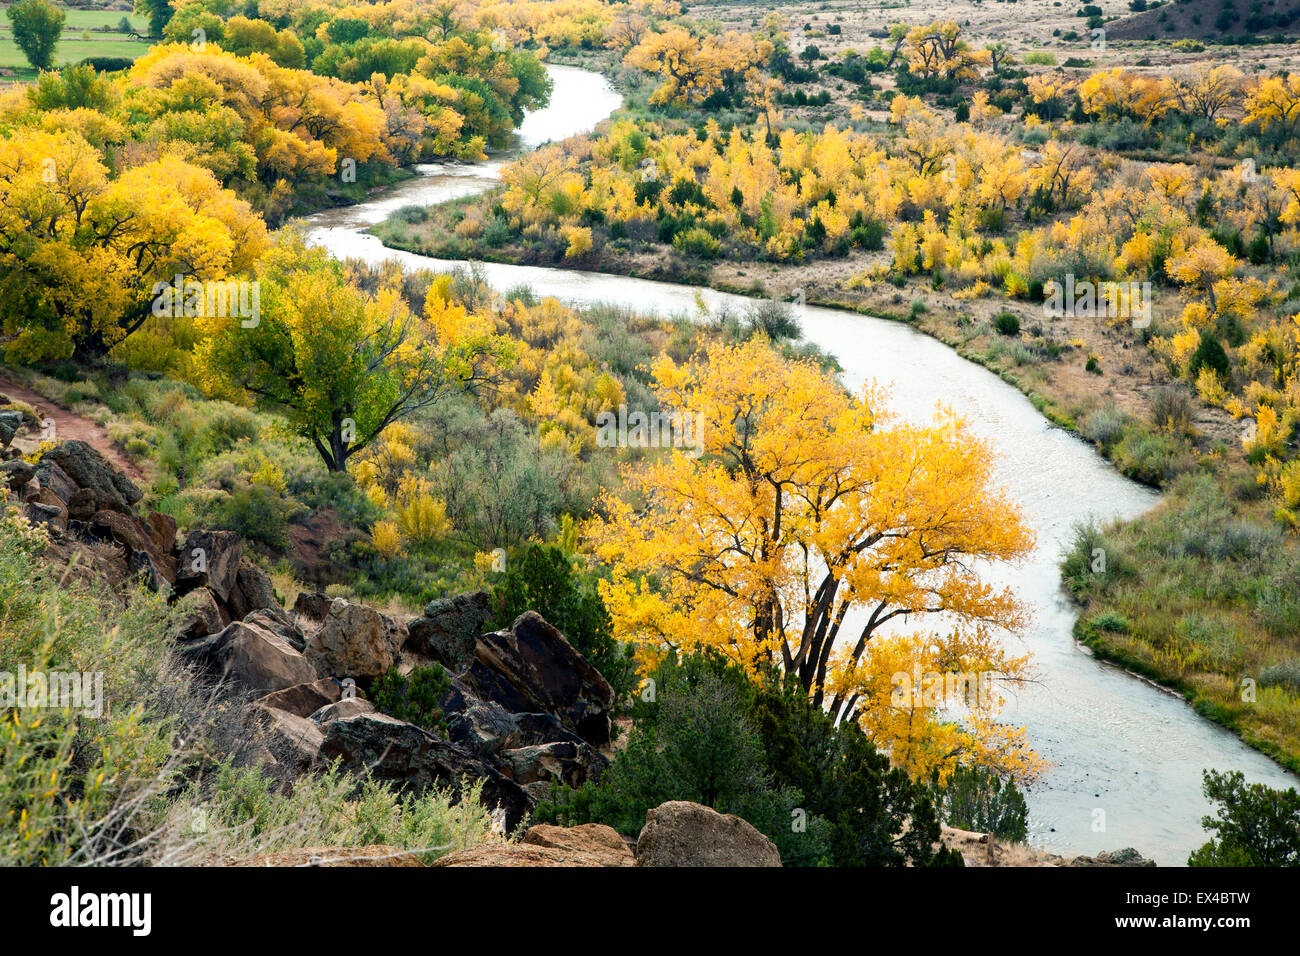 Chama River and cottonwoods in fall colors, Abiquiu, New Mexico USA Stock Photo